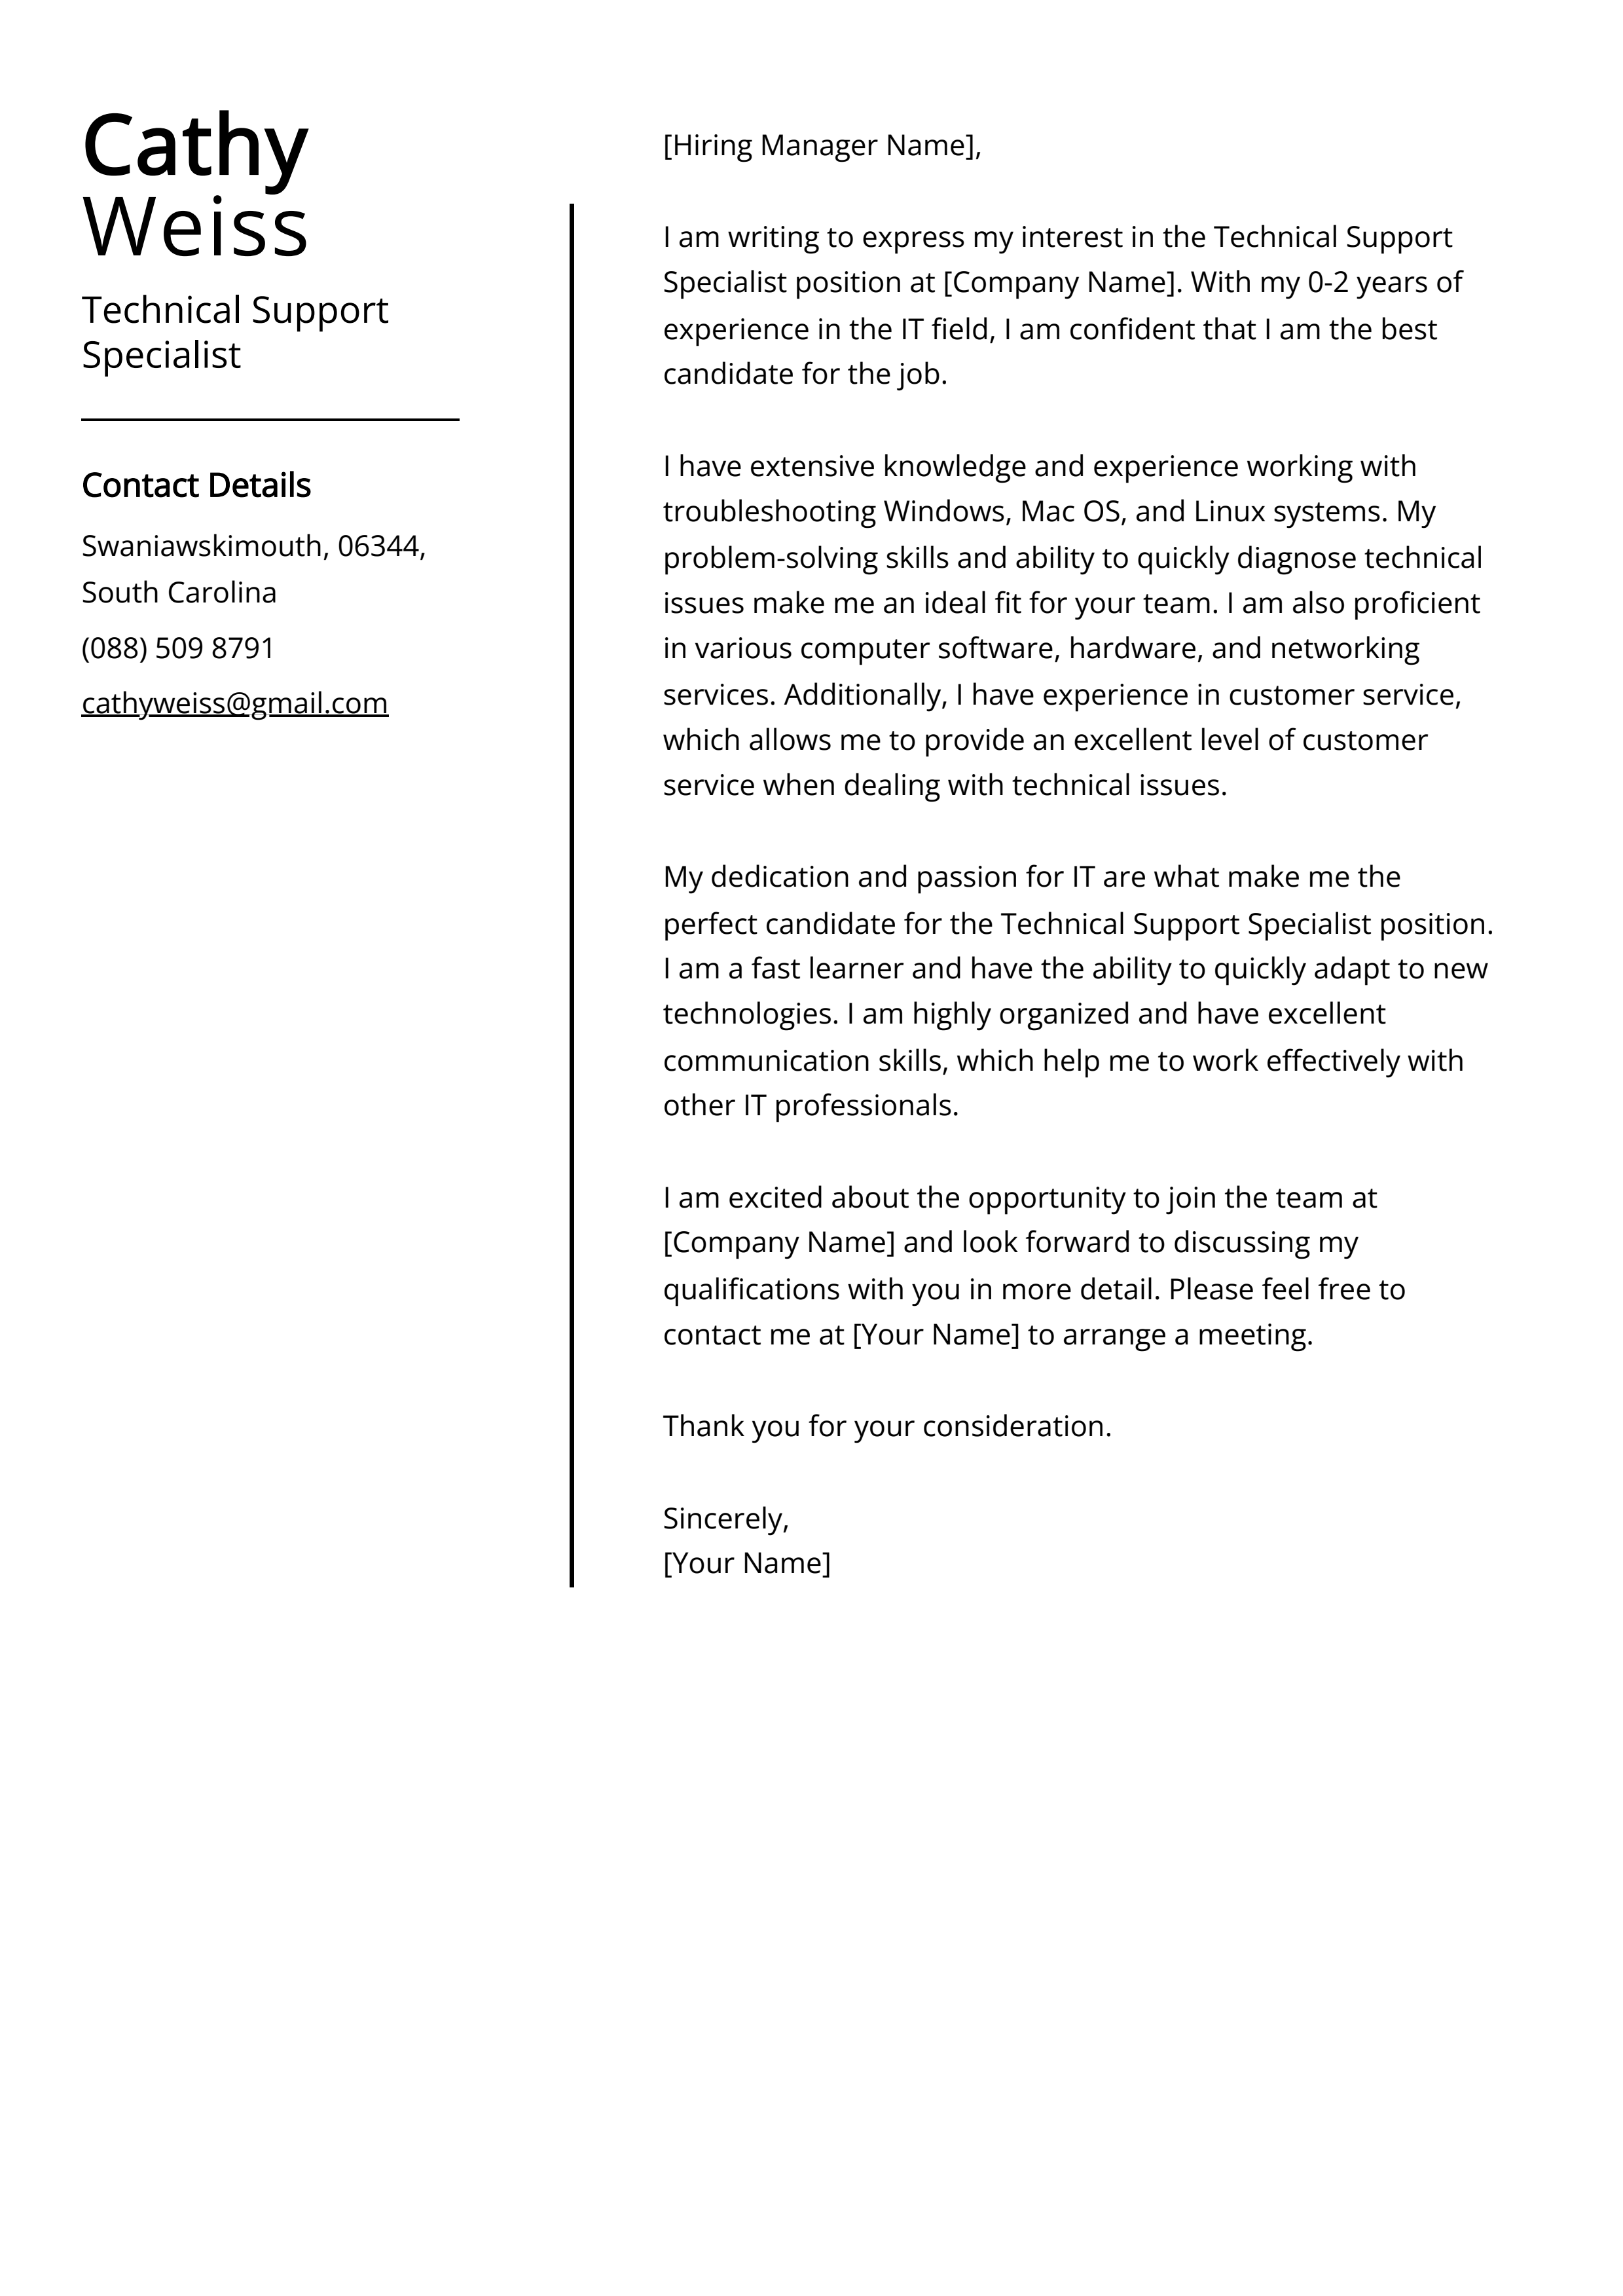 Technical Support Specialist Cover Letter Example